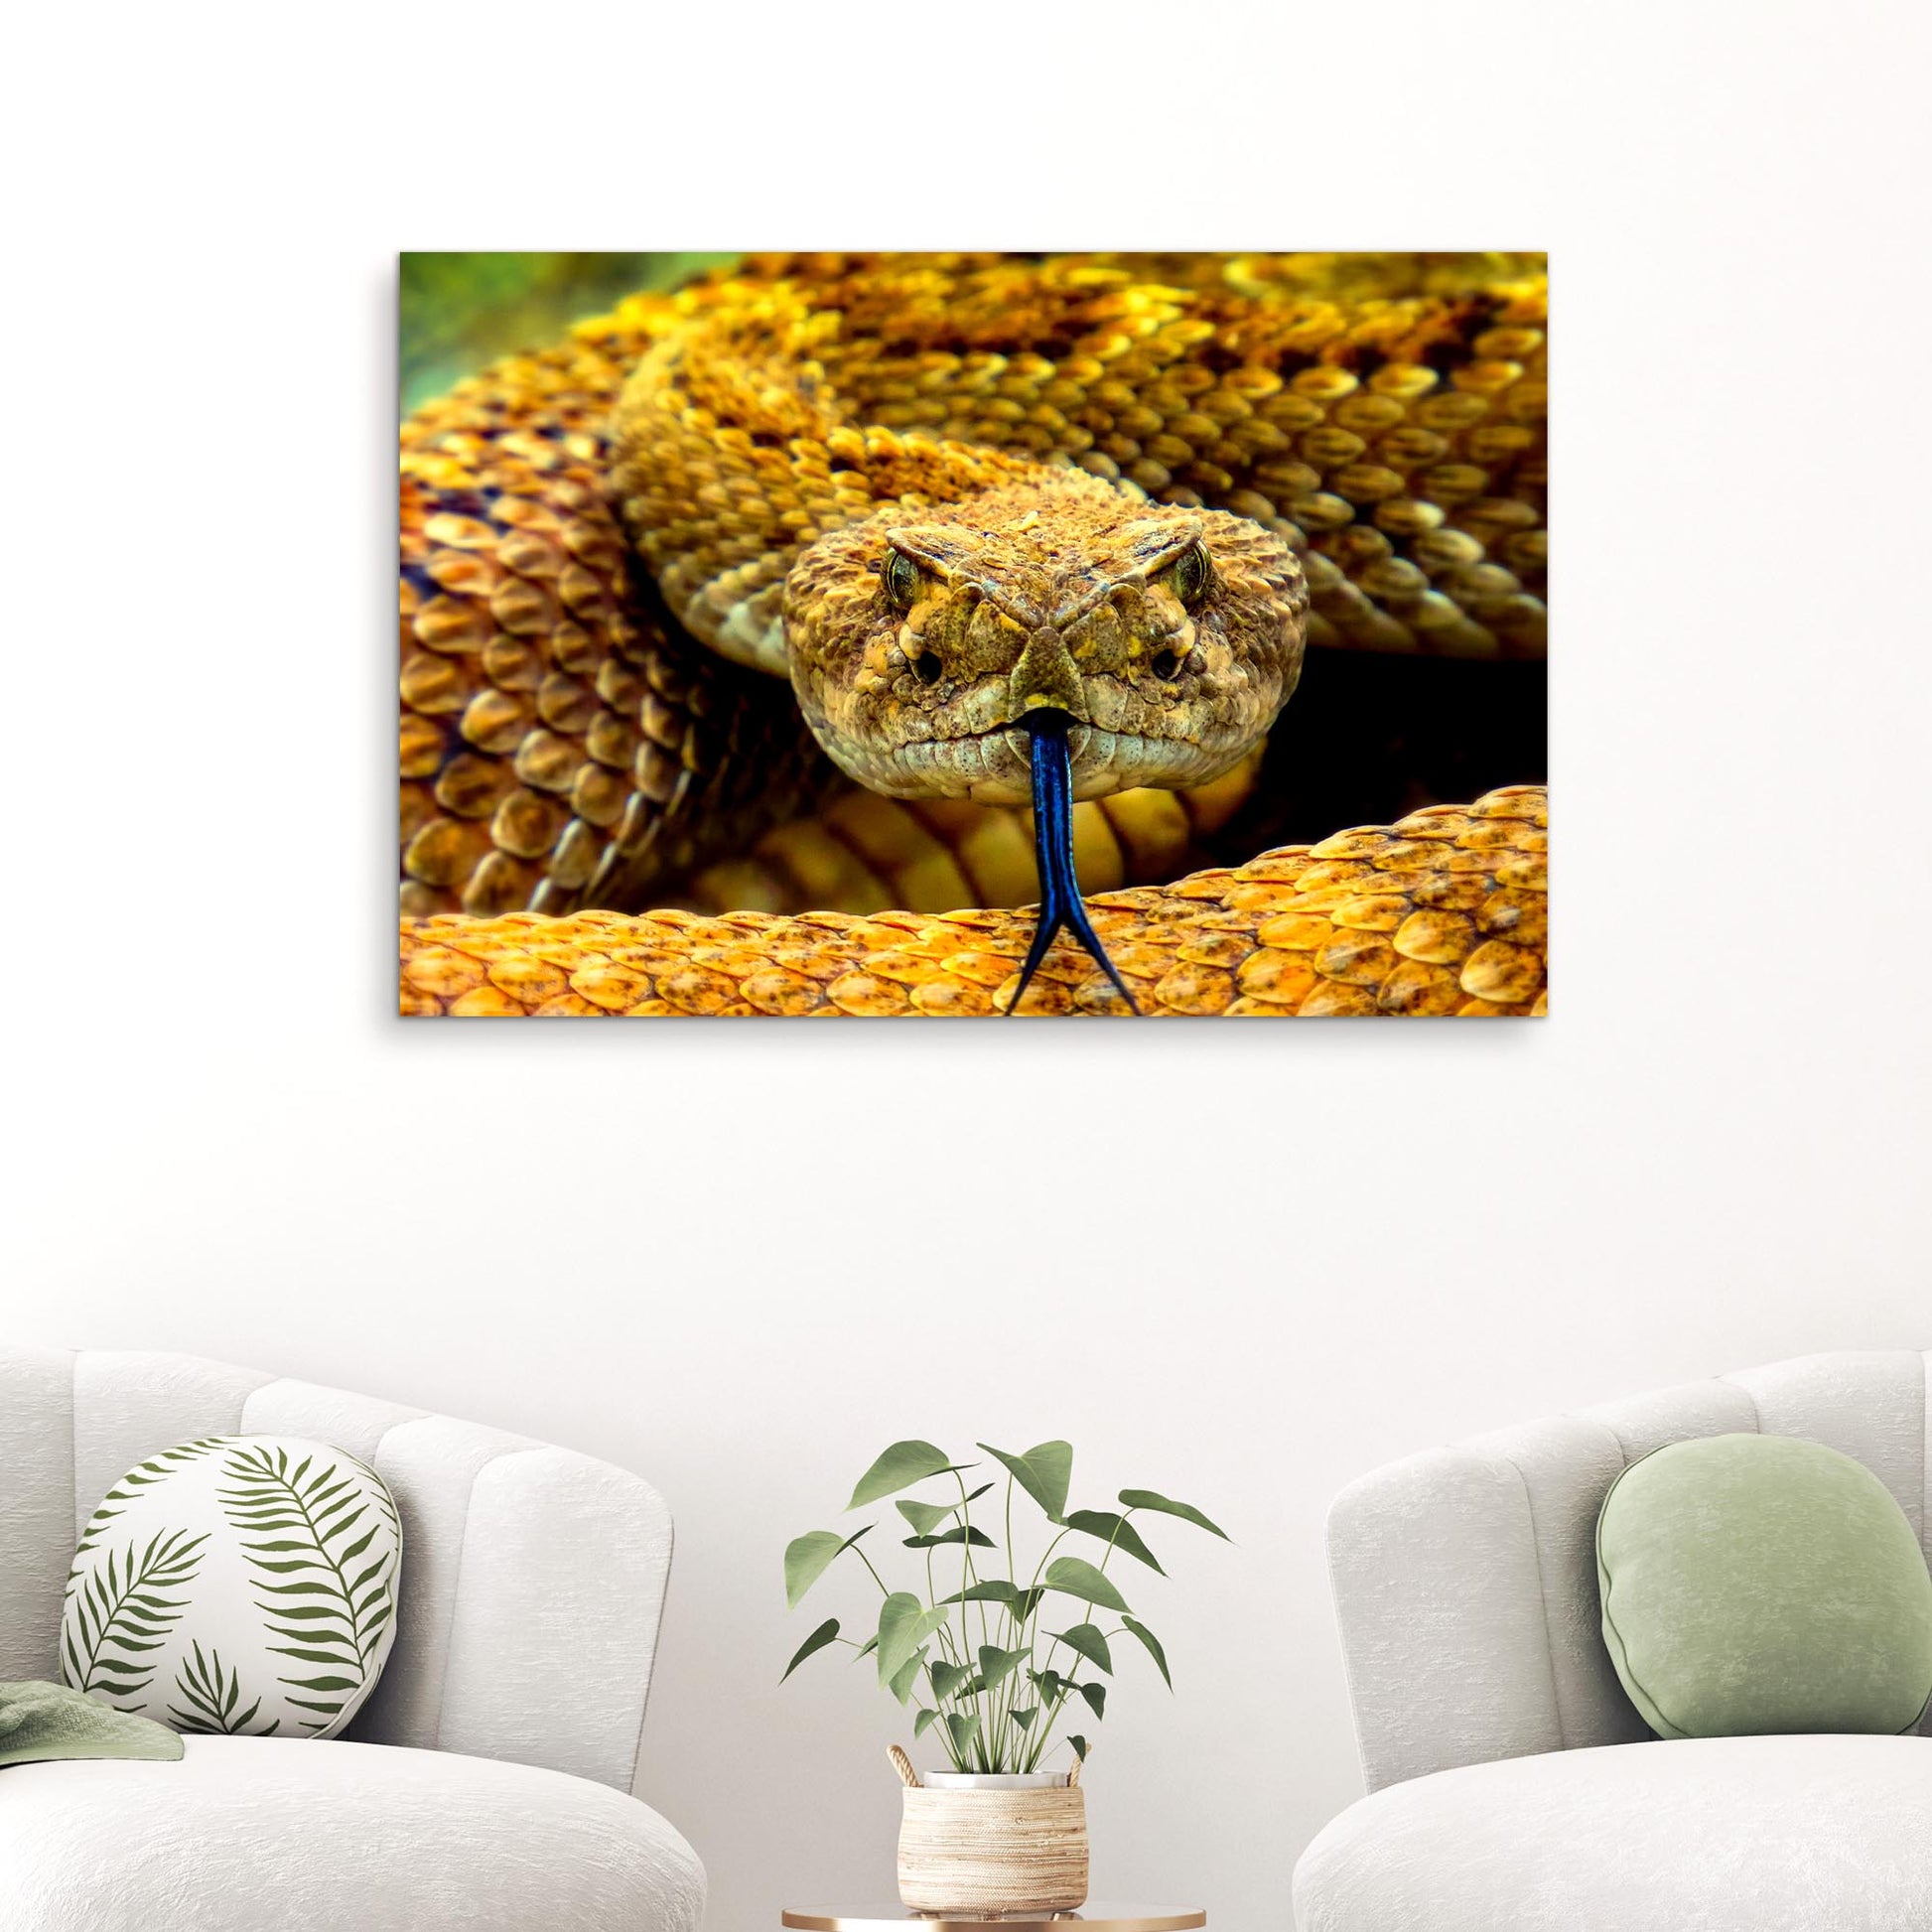 Reptile Snake Coiled Rattlesnake Canvas Wall Art Style 1 - by Tailored Canvases